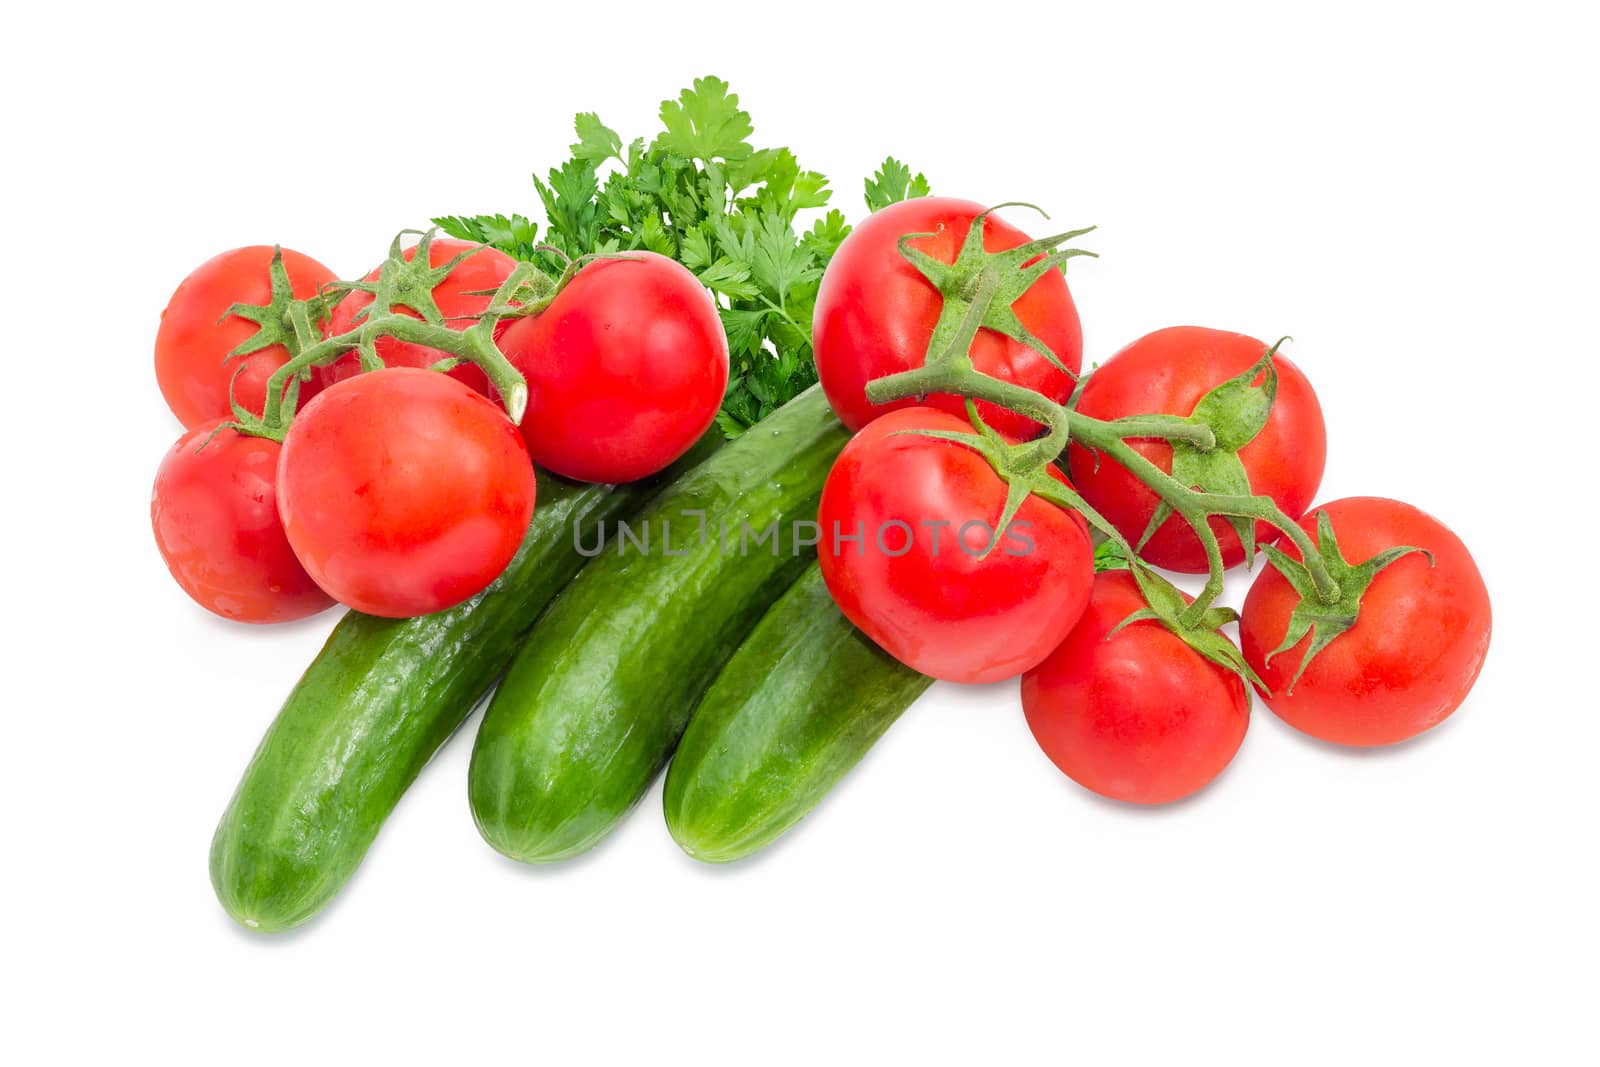 Three cucumbers and two branches of the ripe red tomatoes with droplets of dew on the parsley bundle on a light background
